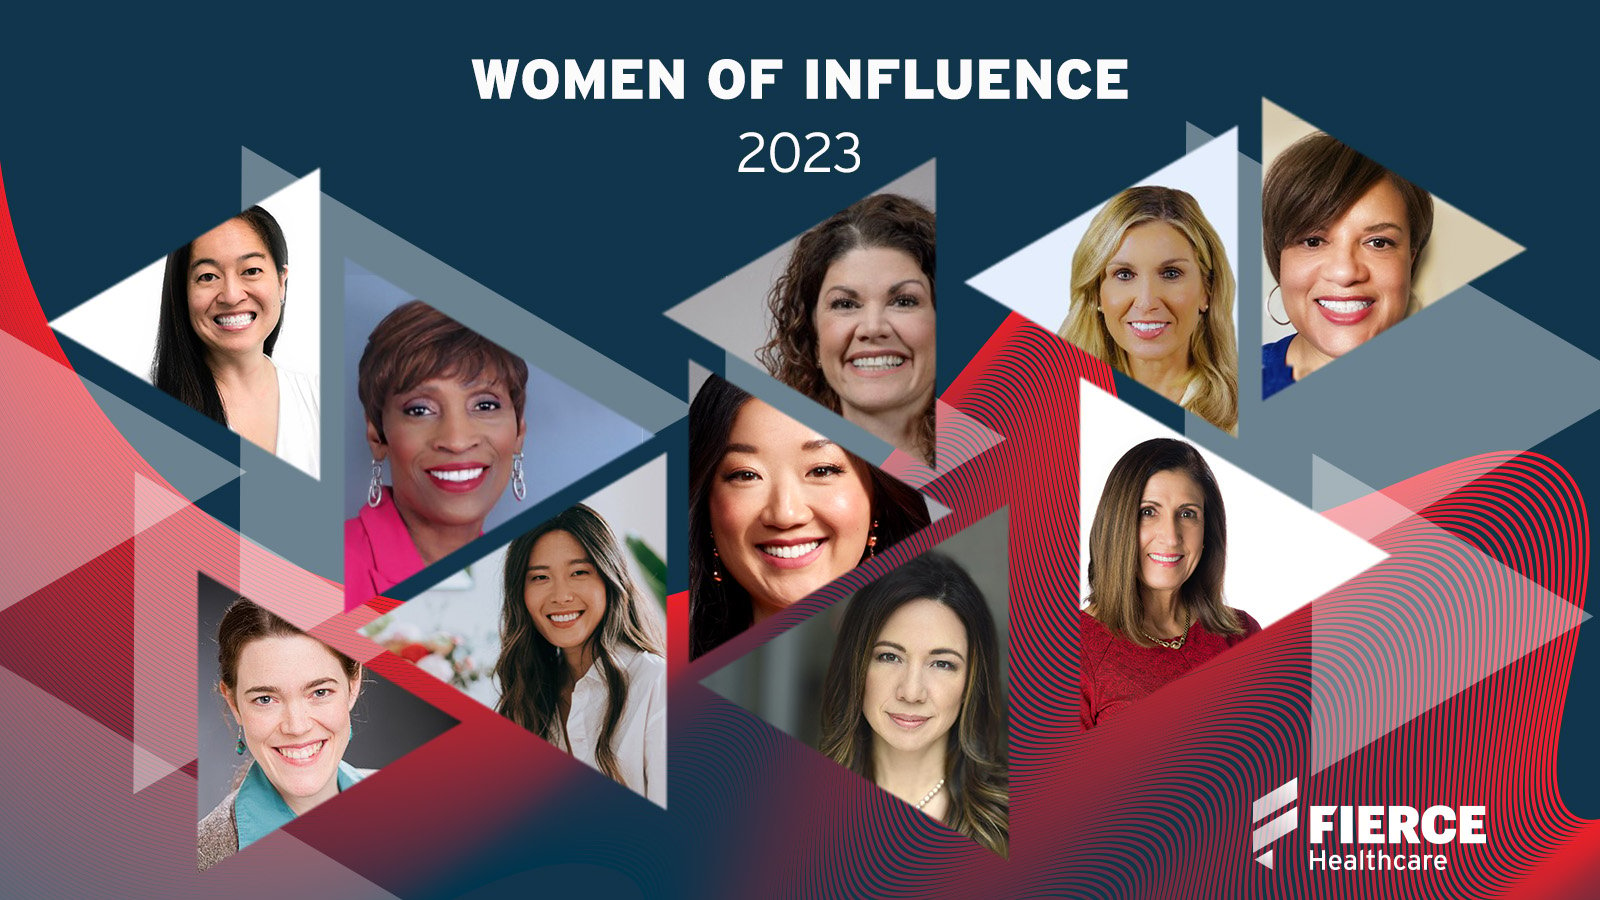 A graphic displaying the winners of the 2023 Women of Influence